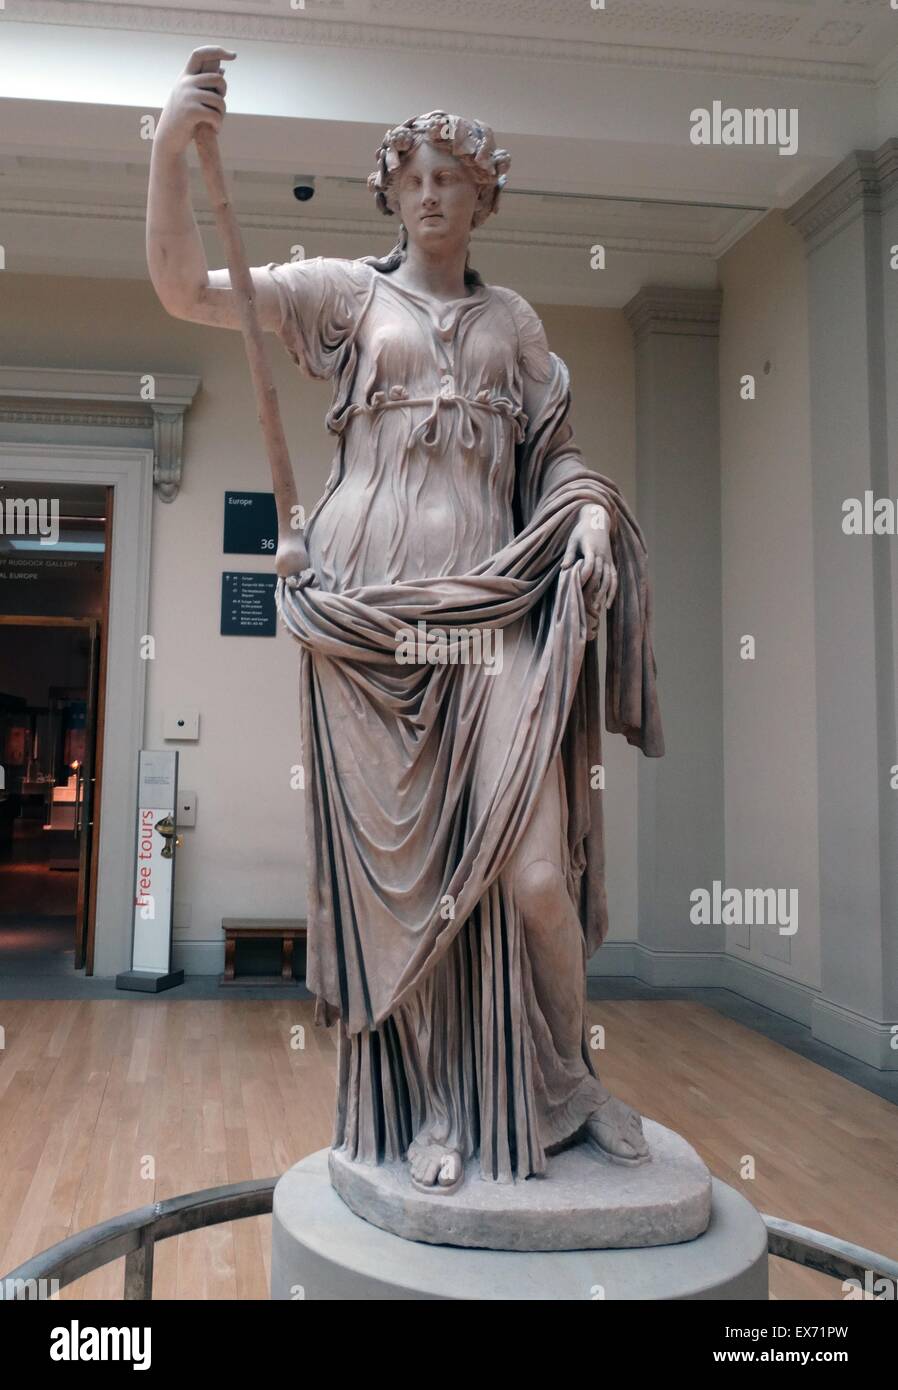 Thalia, Muse of Comedy Roman, 2nd century AD statue. ln ancient mythology, Thalia was one of the nine Muses. The Muses were female companions of the god Apollo and devoted to the arts and sciences. Stock Photo